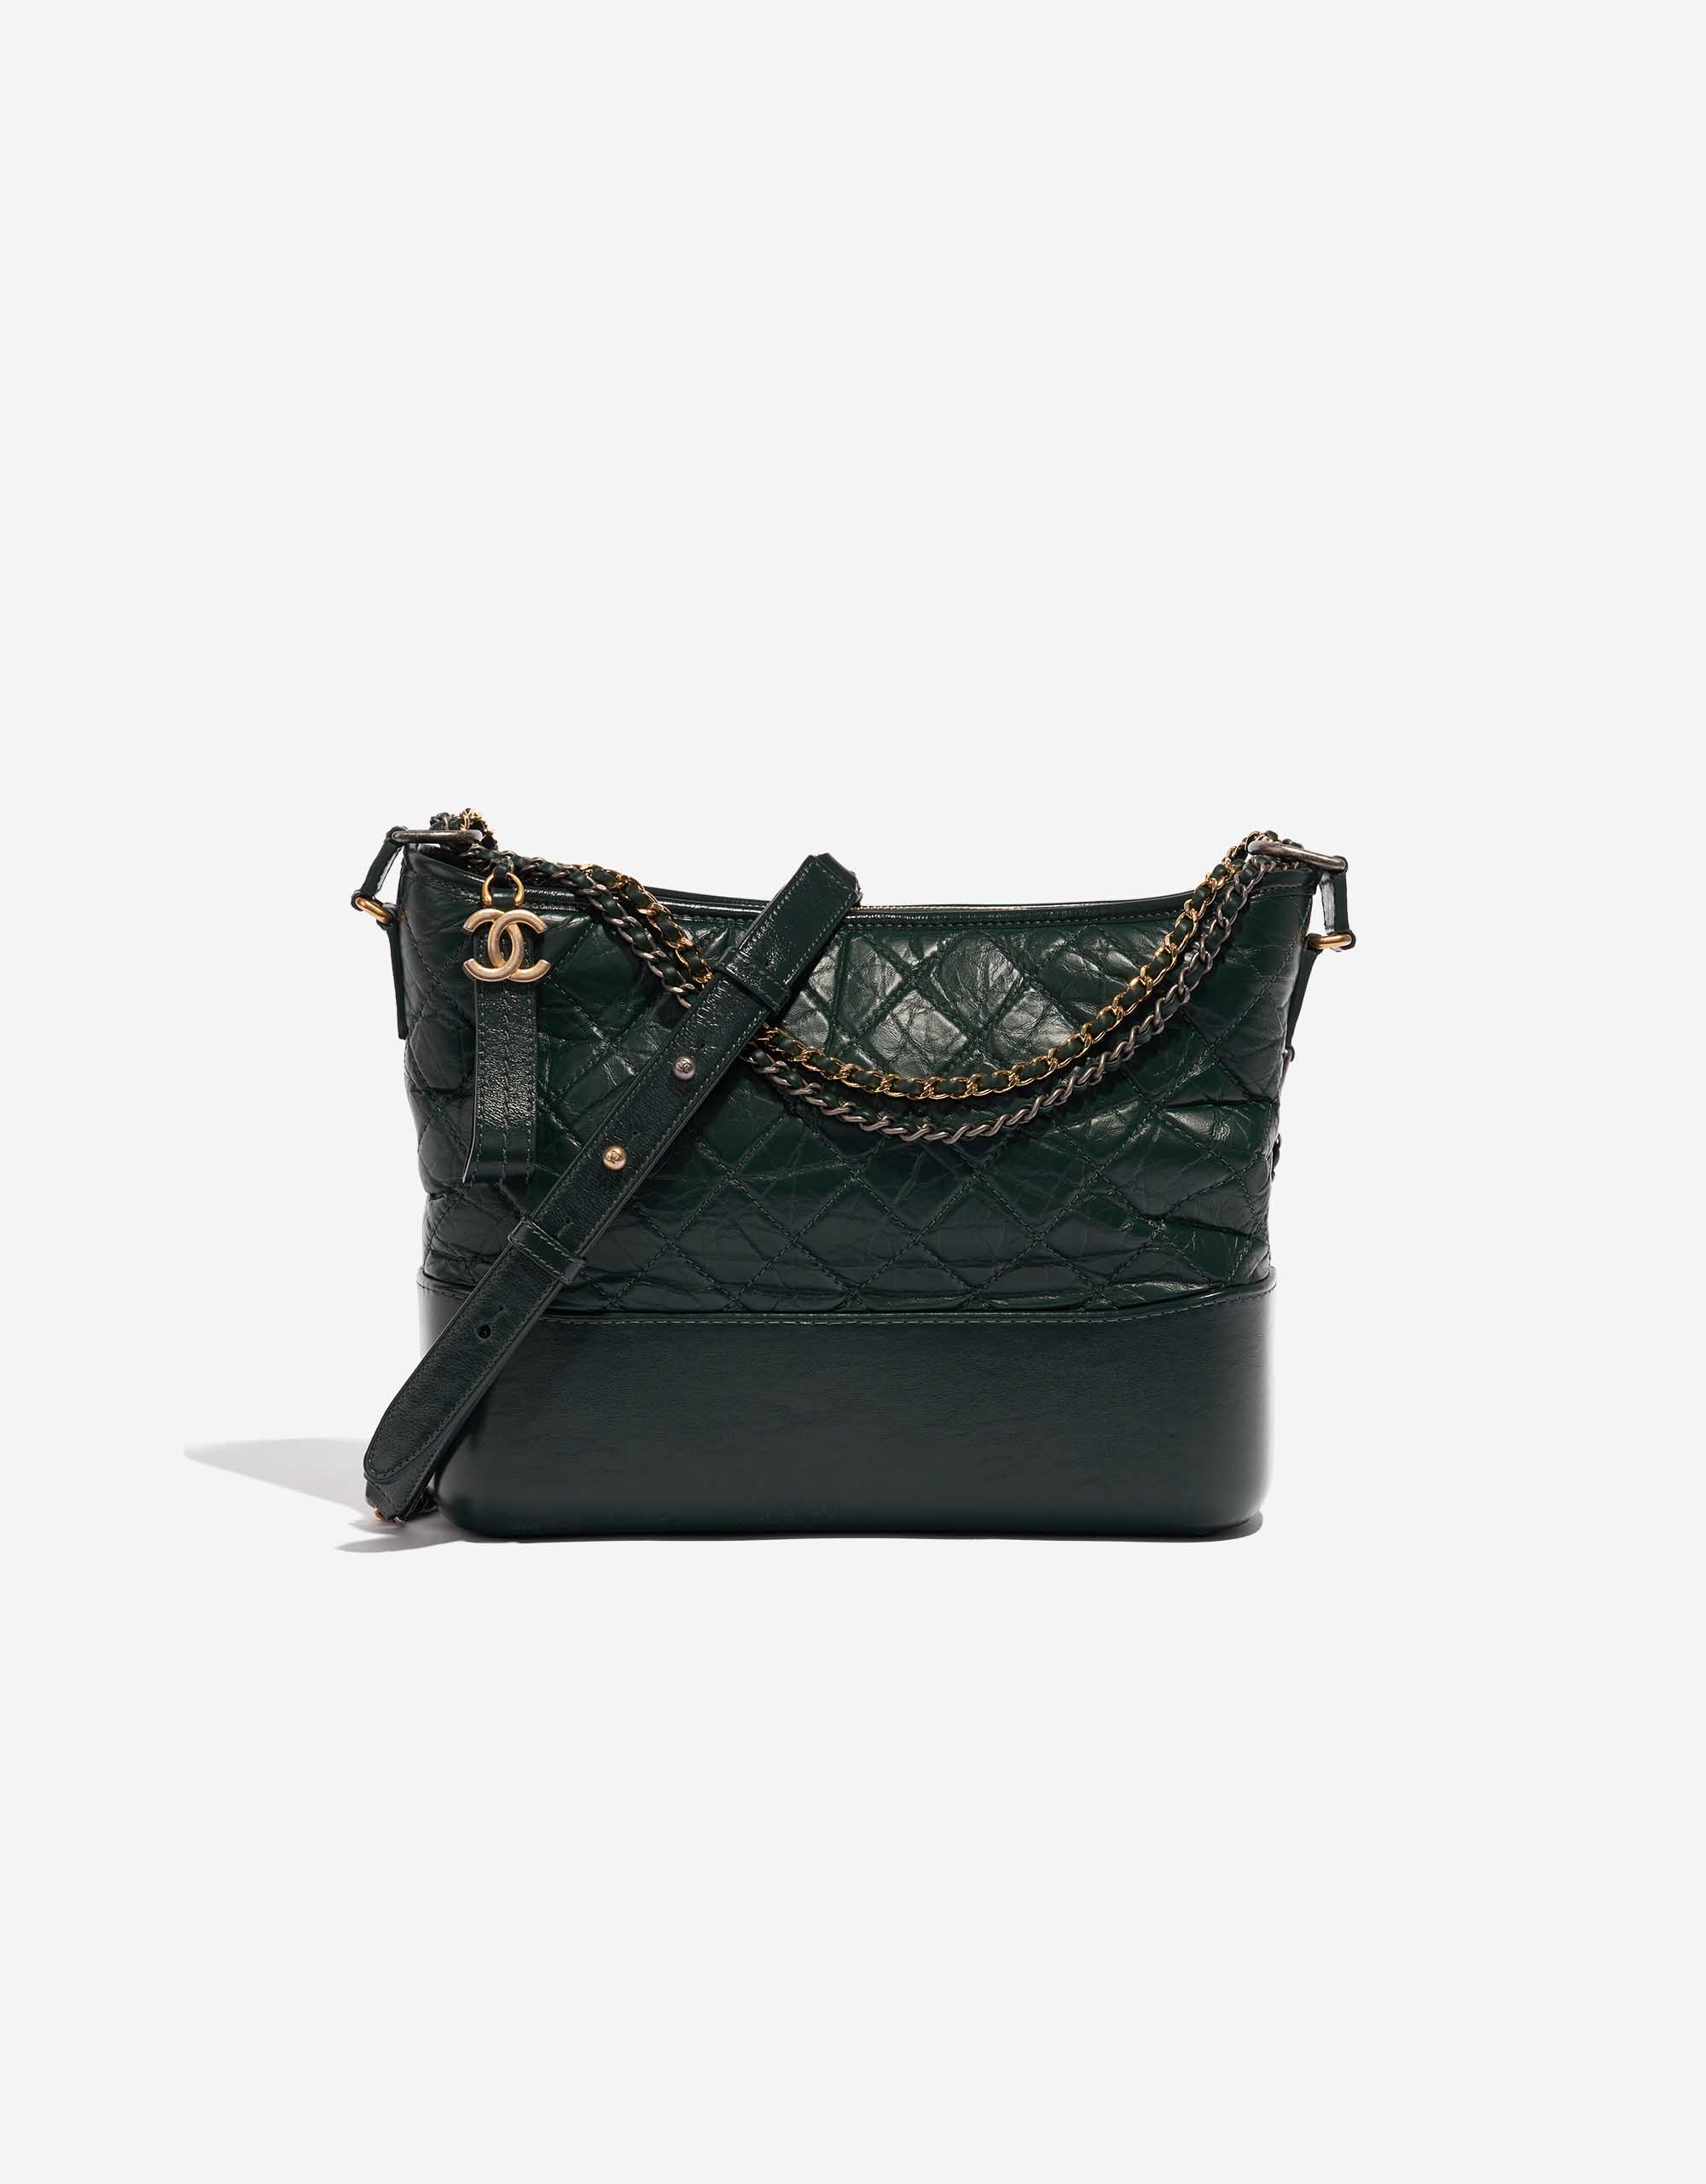 Chanel Gabrielle Green - 9 For Sale on 1stDibs